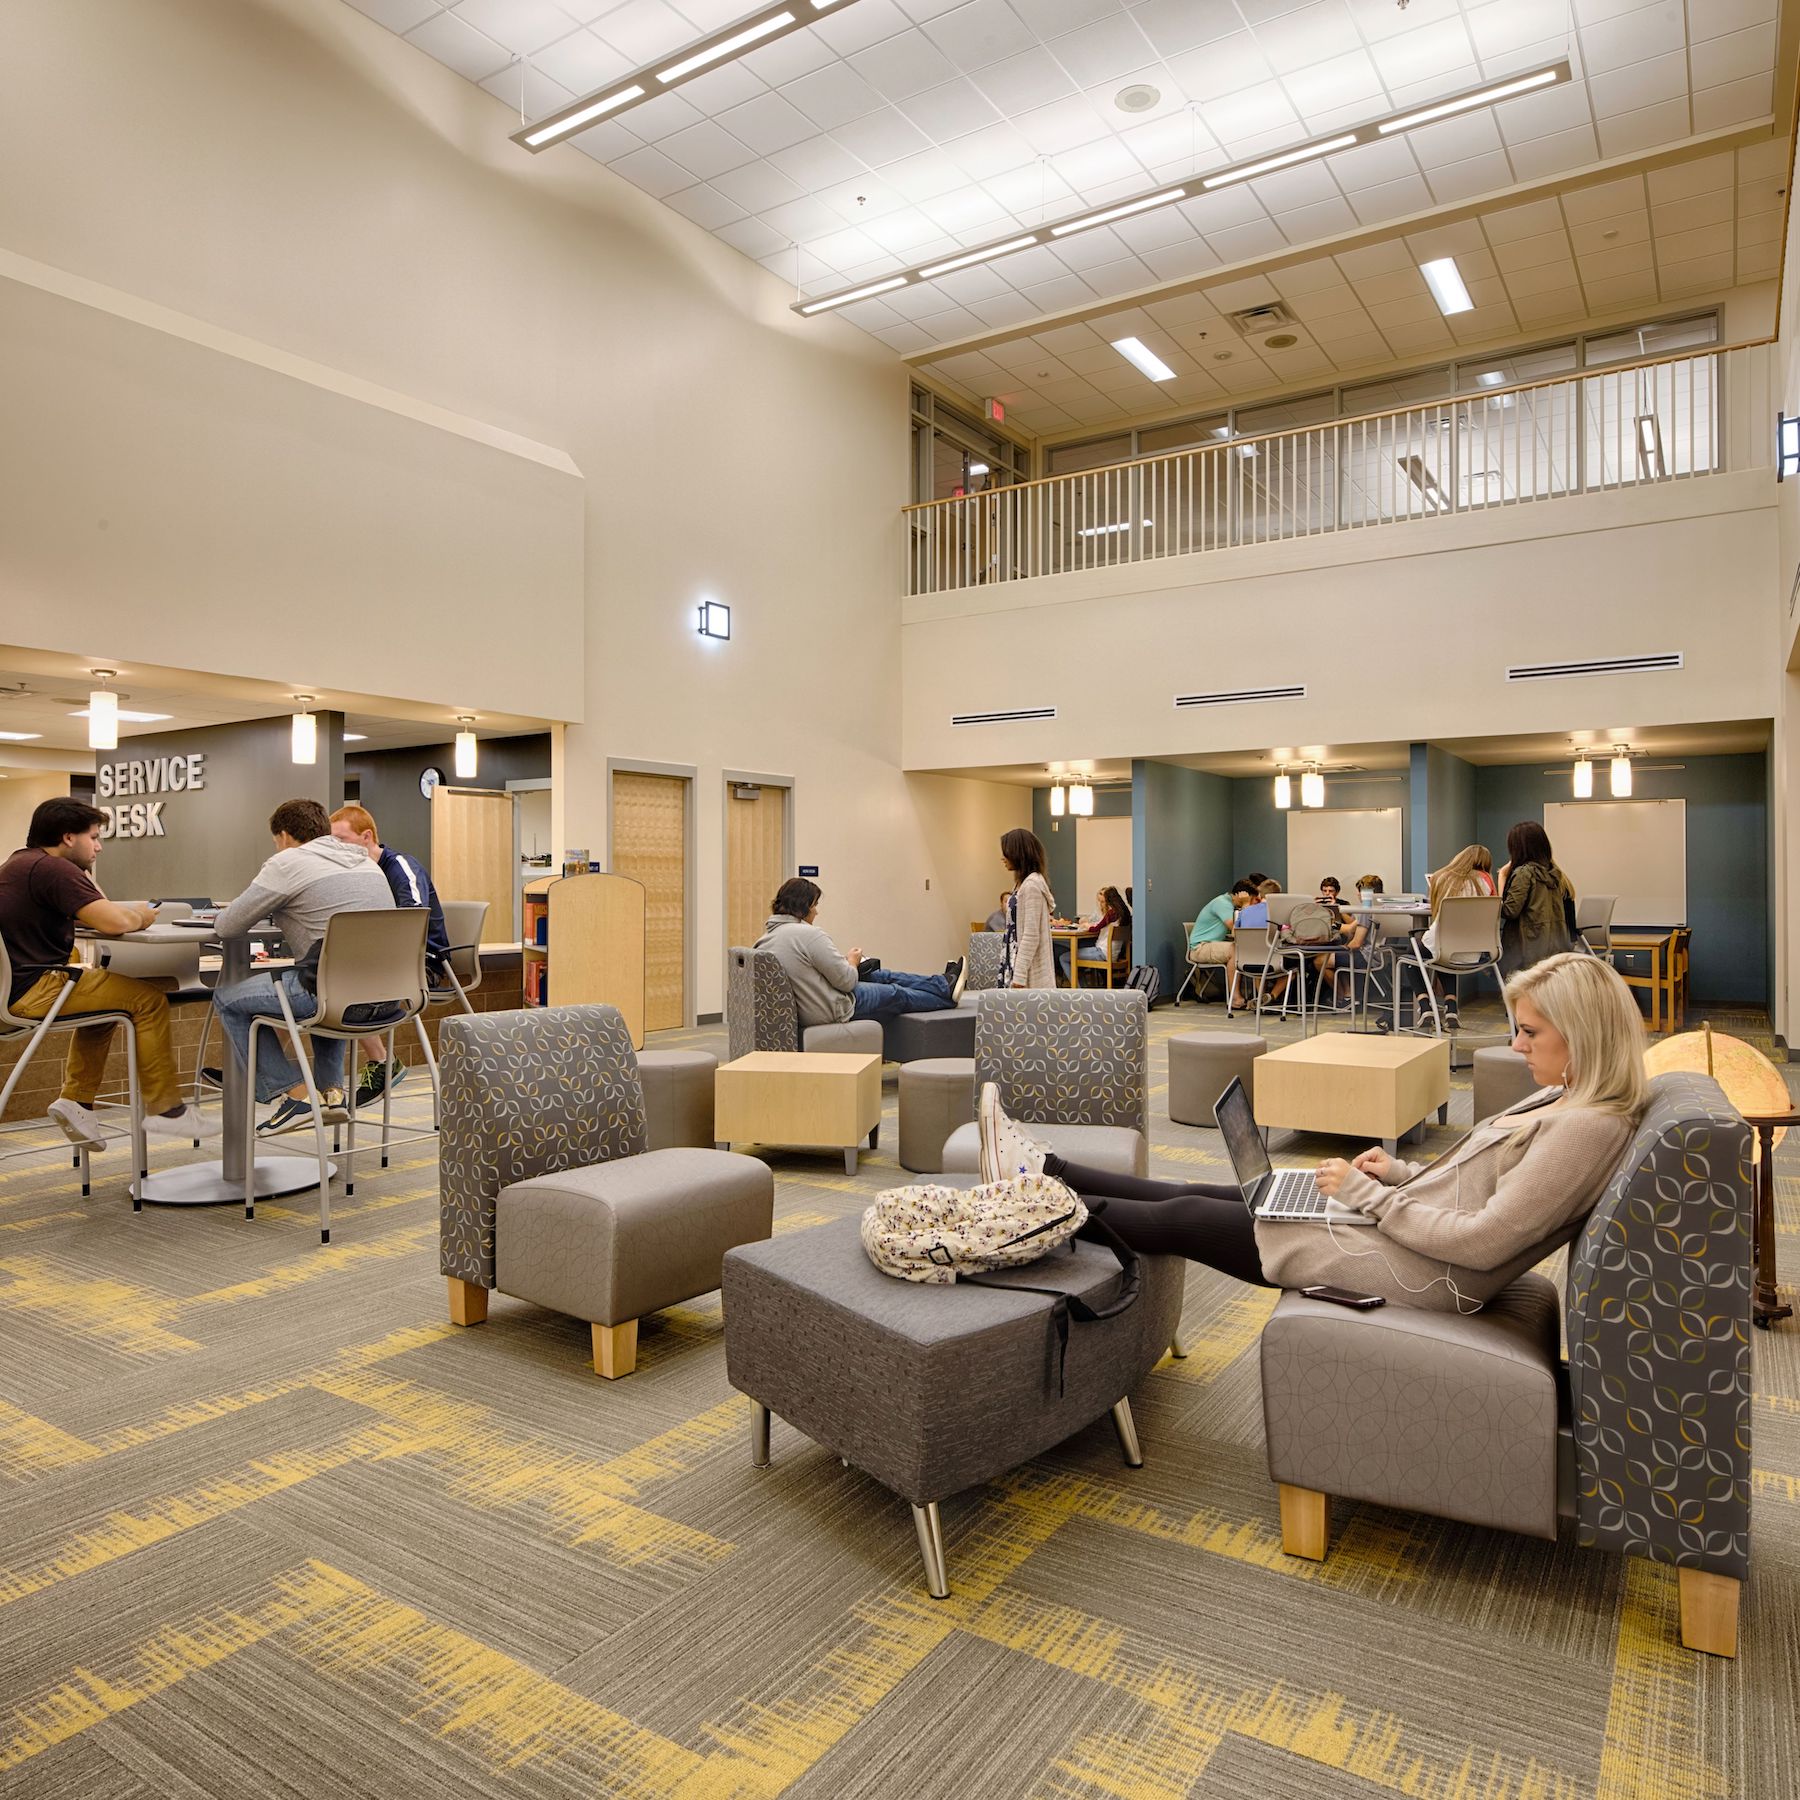 Media Center in Hermantown (Minn.) high school. images: Wold Architects & Engineers